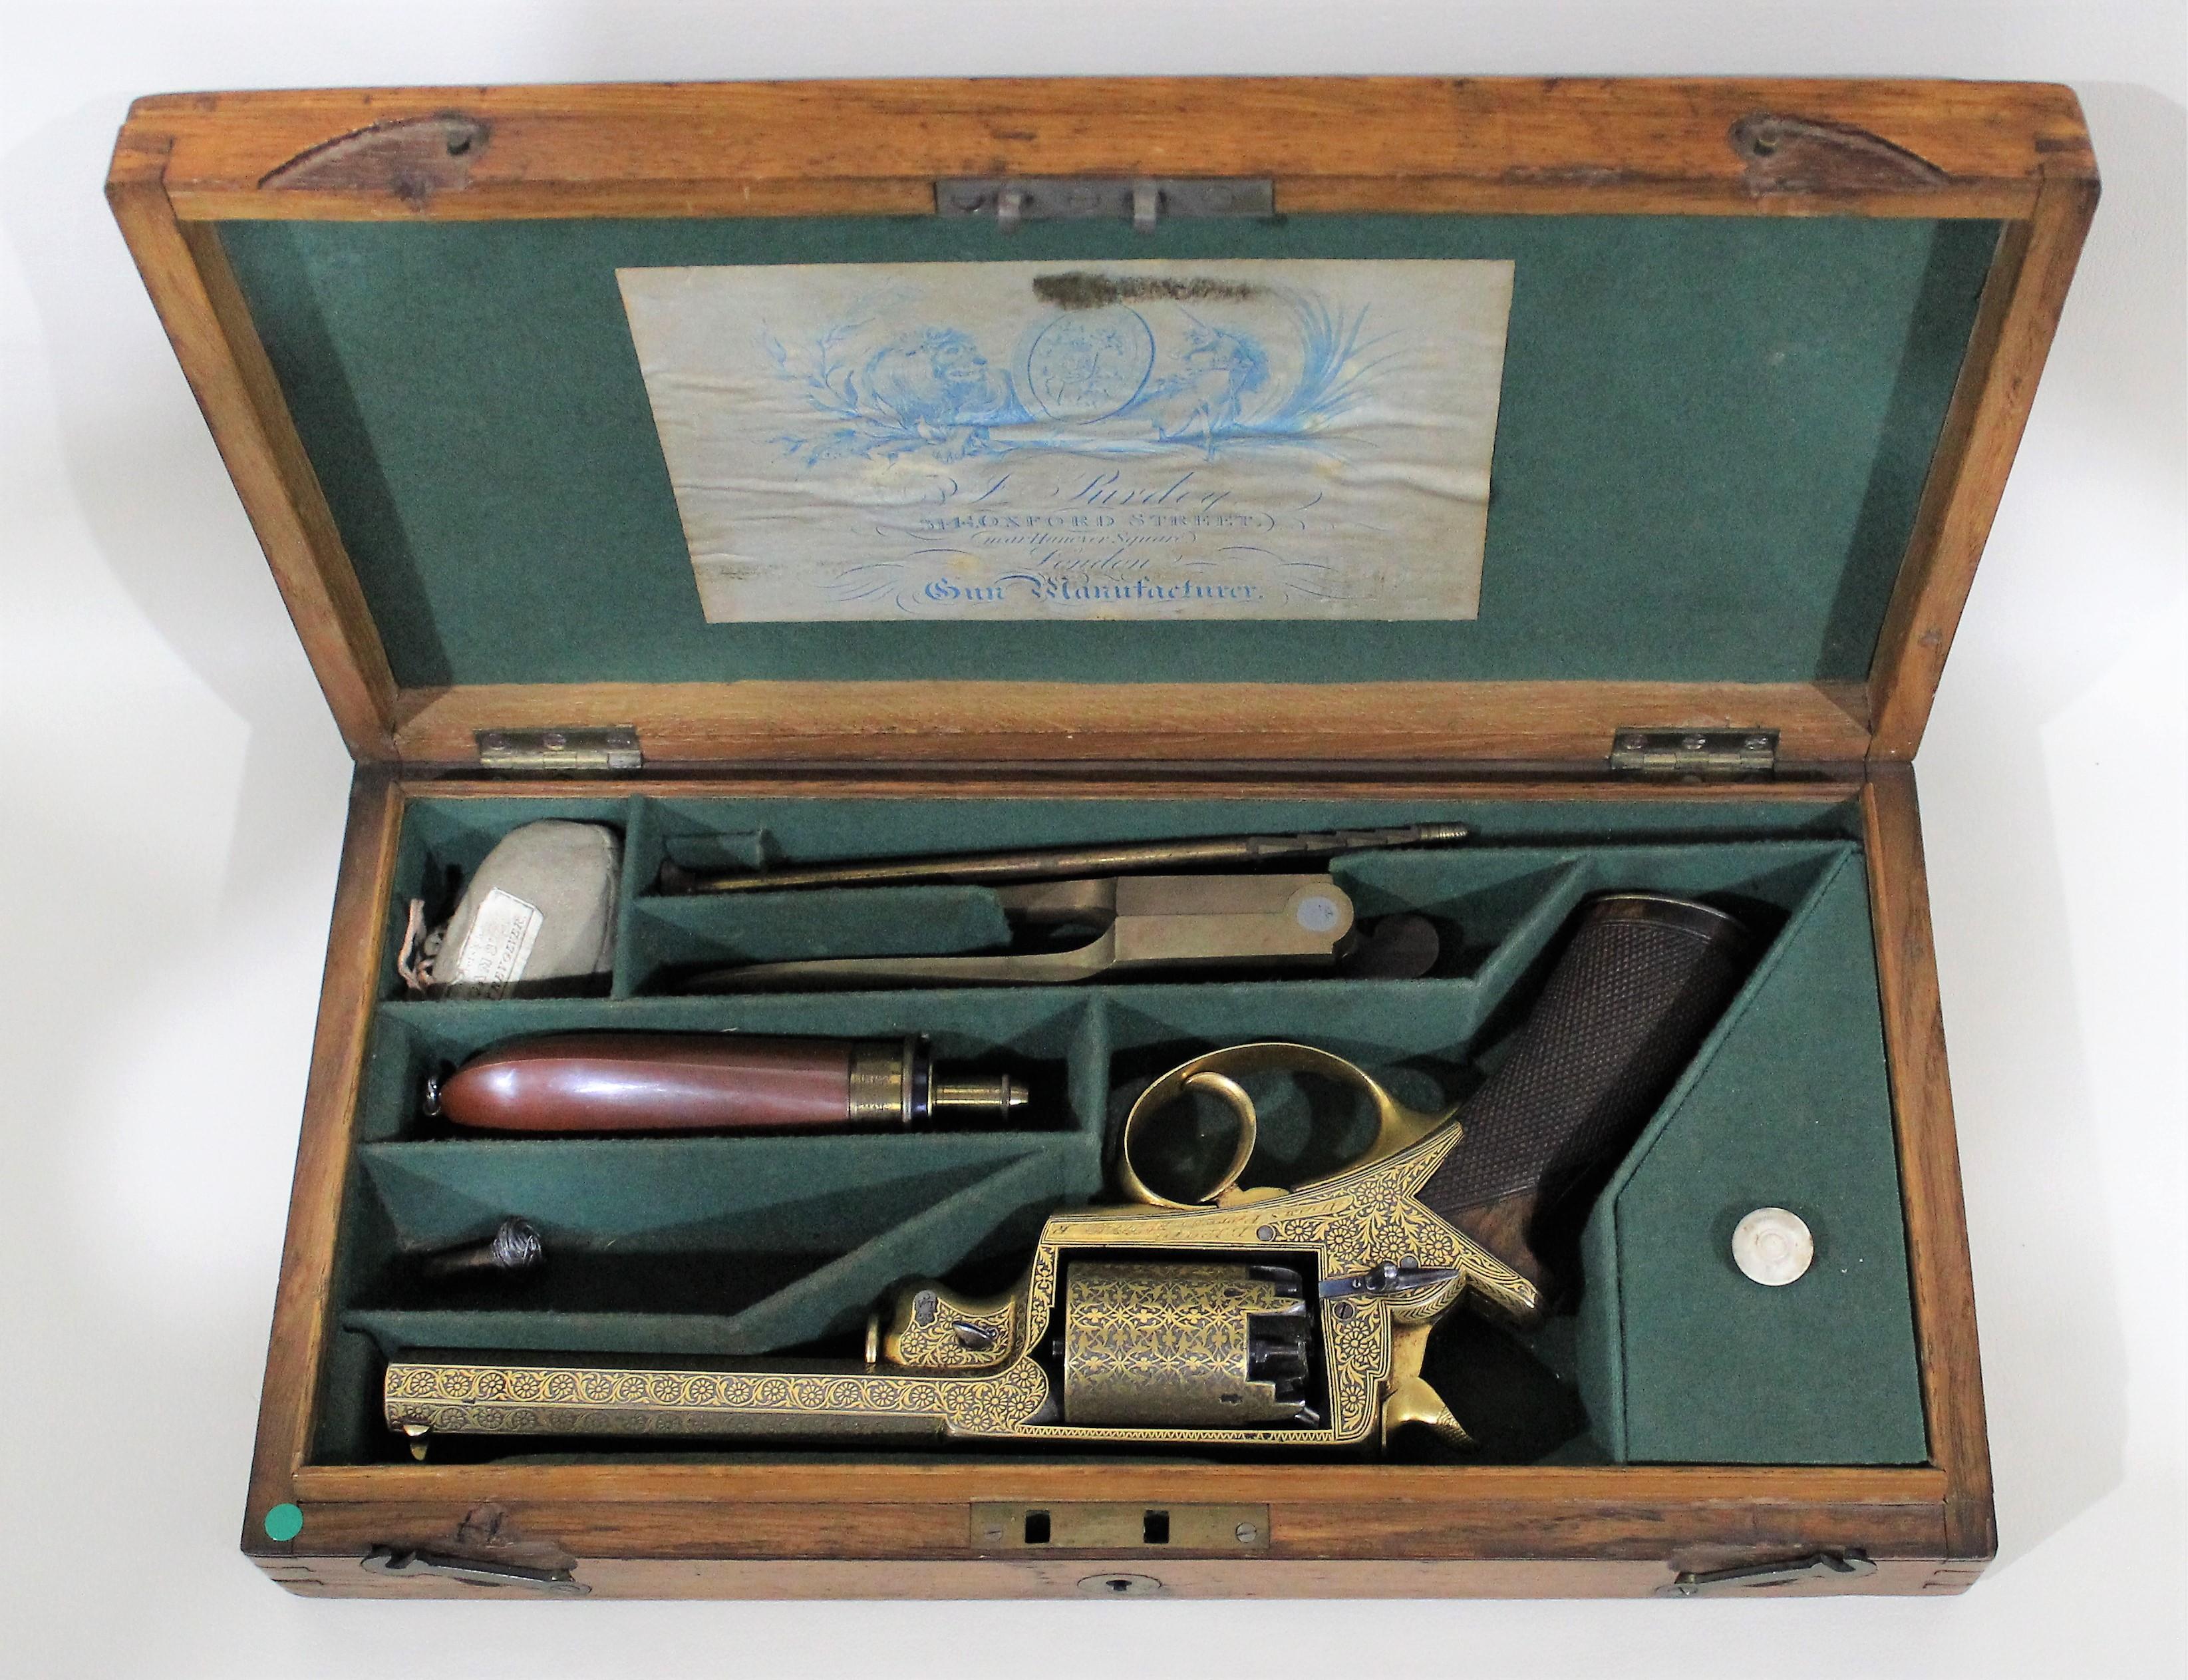 English Beaumont-Adams Revolver with Gold Damascene Embellishment and Original Case